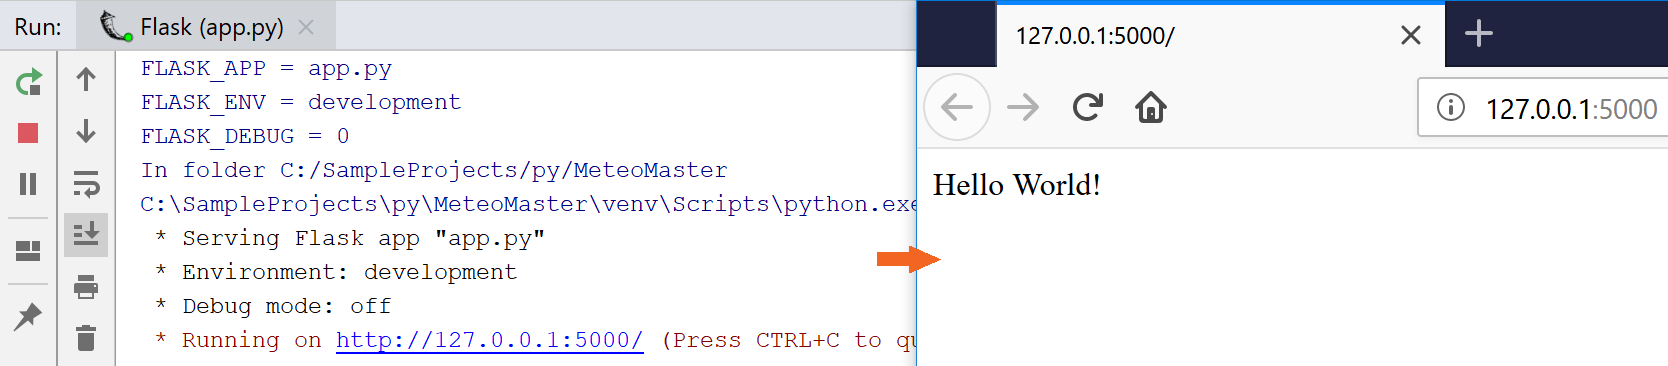 Preview the Hello World app